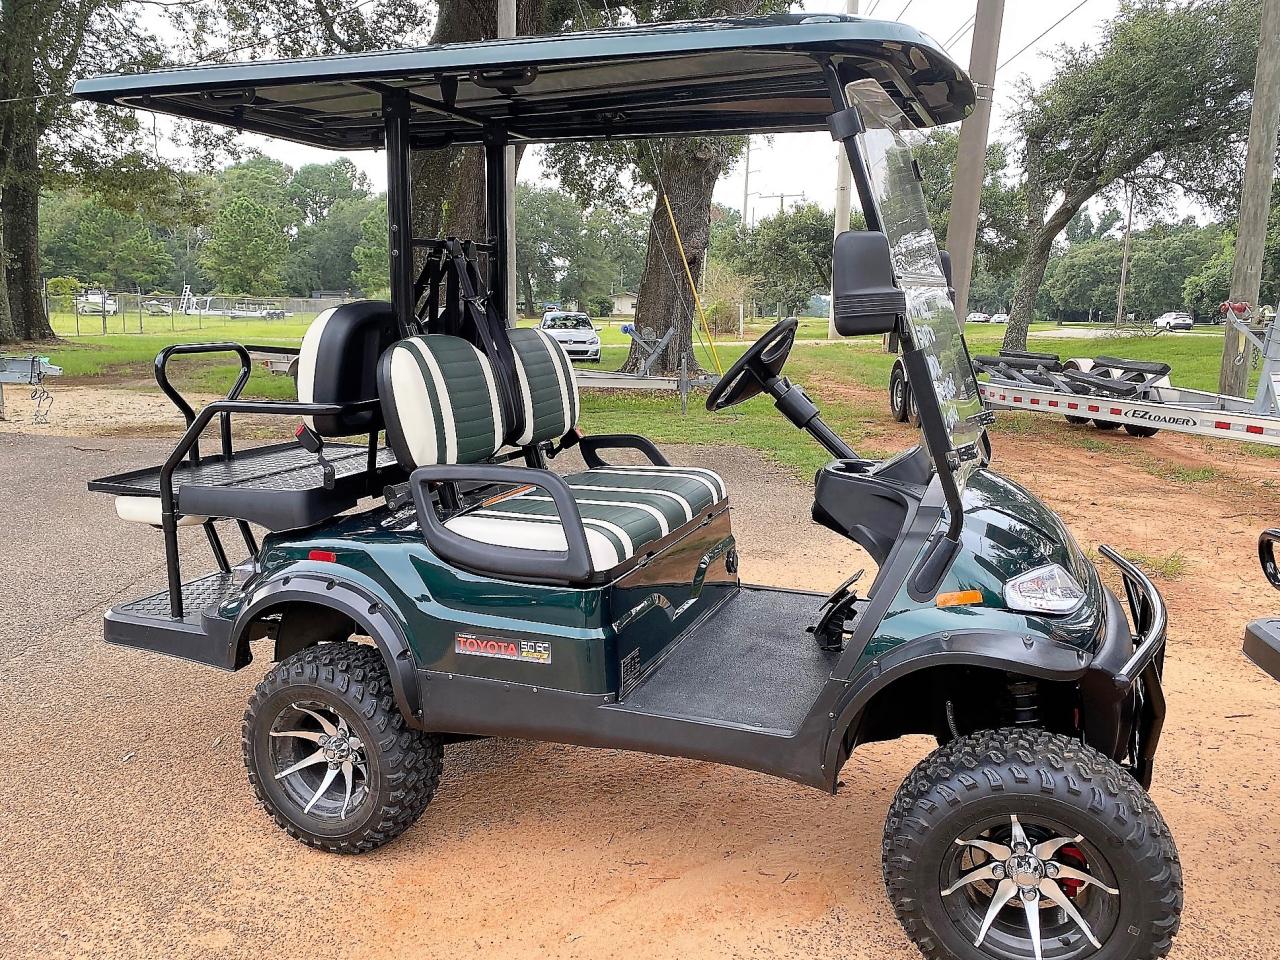 Discover Affordable Used Golf Carts for Sale in Archer, Texas